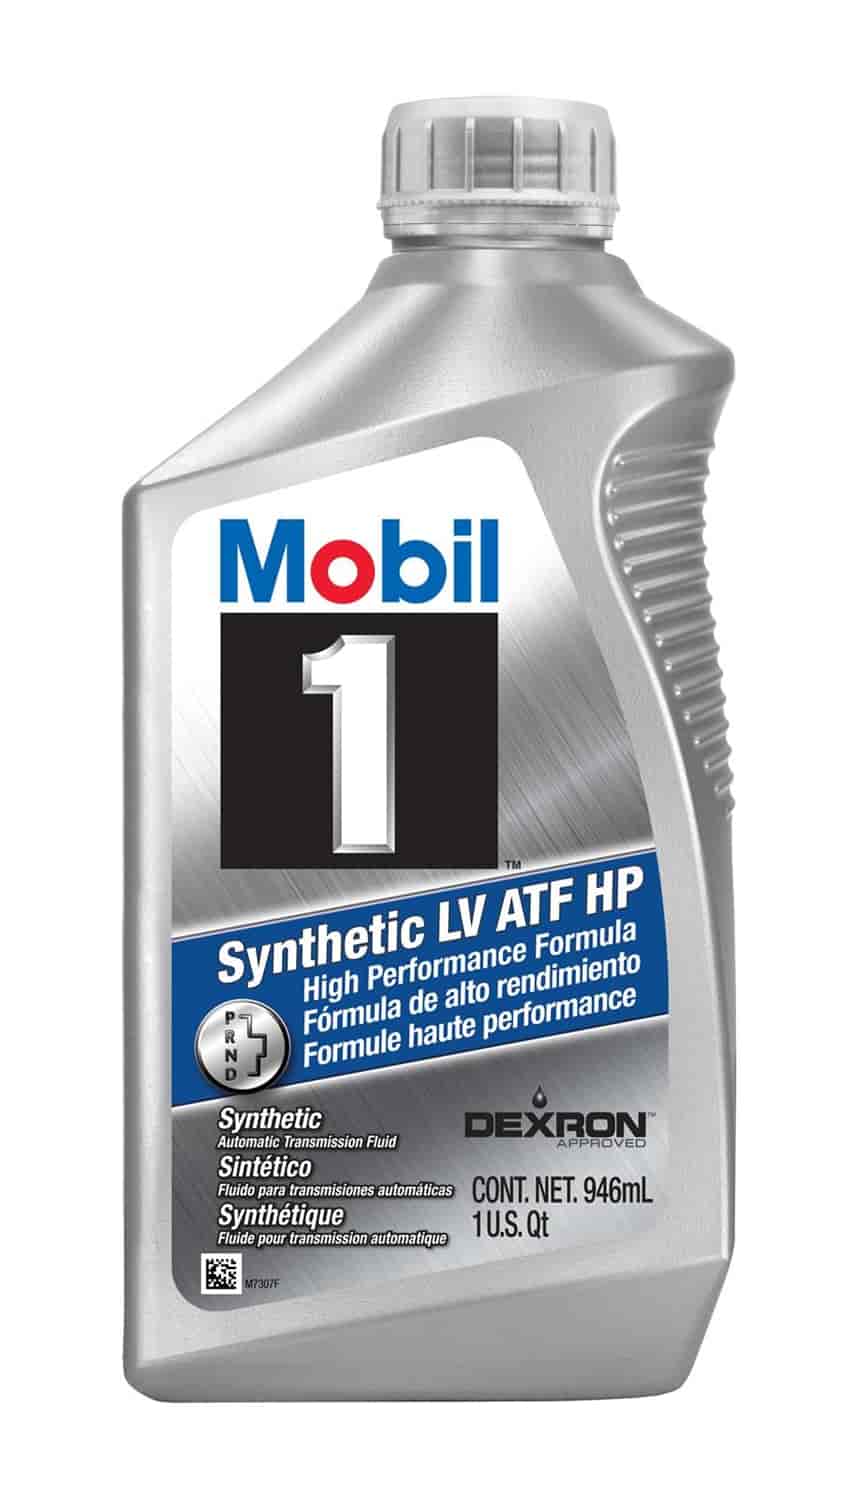 Mobil 1 124715-1: Synthetic LV ATF HP - JEGS